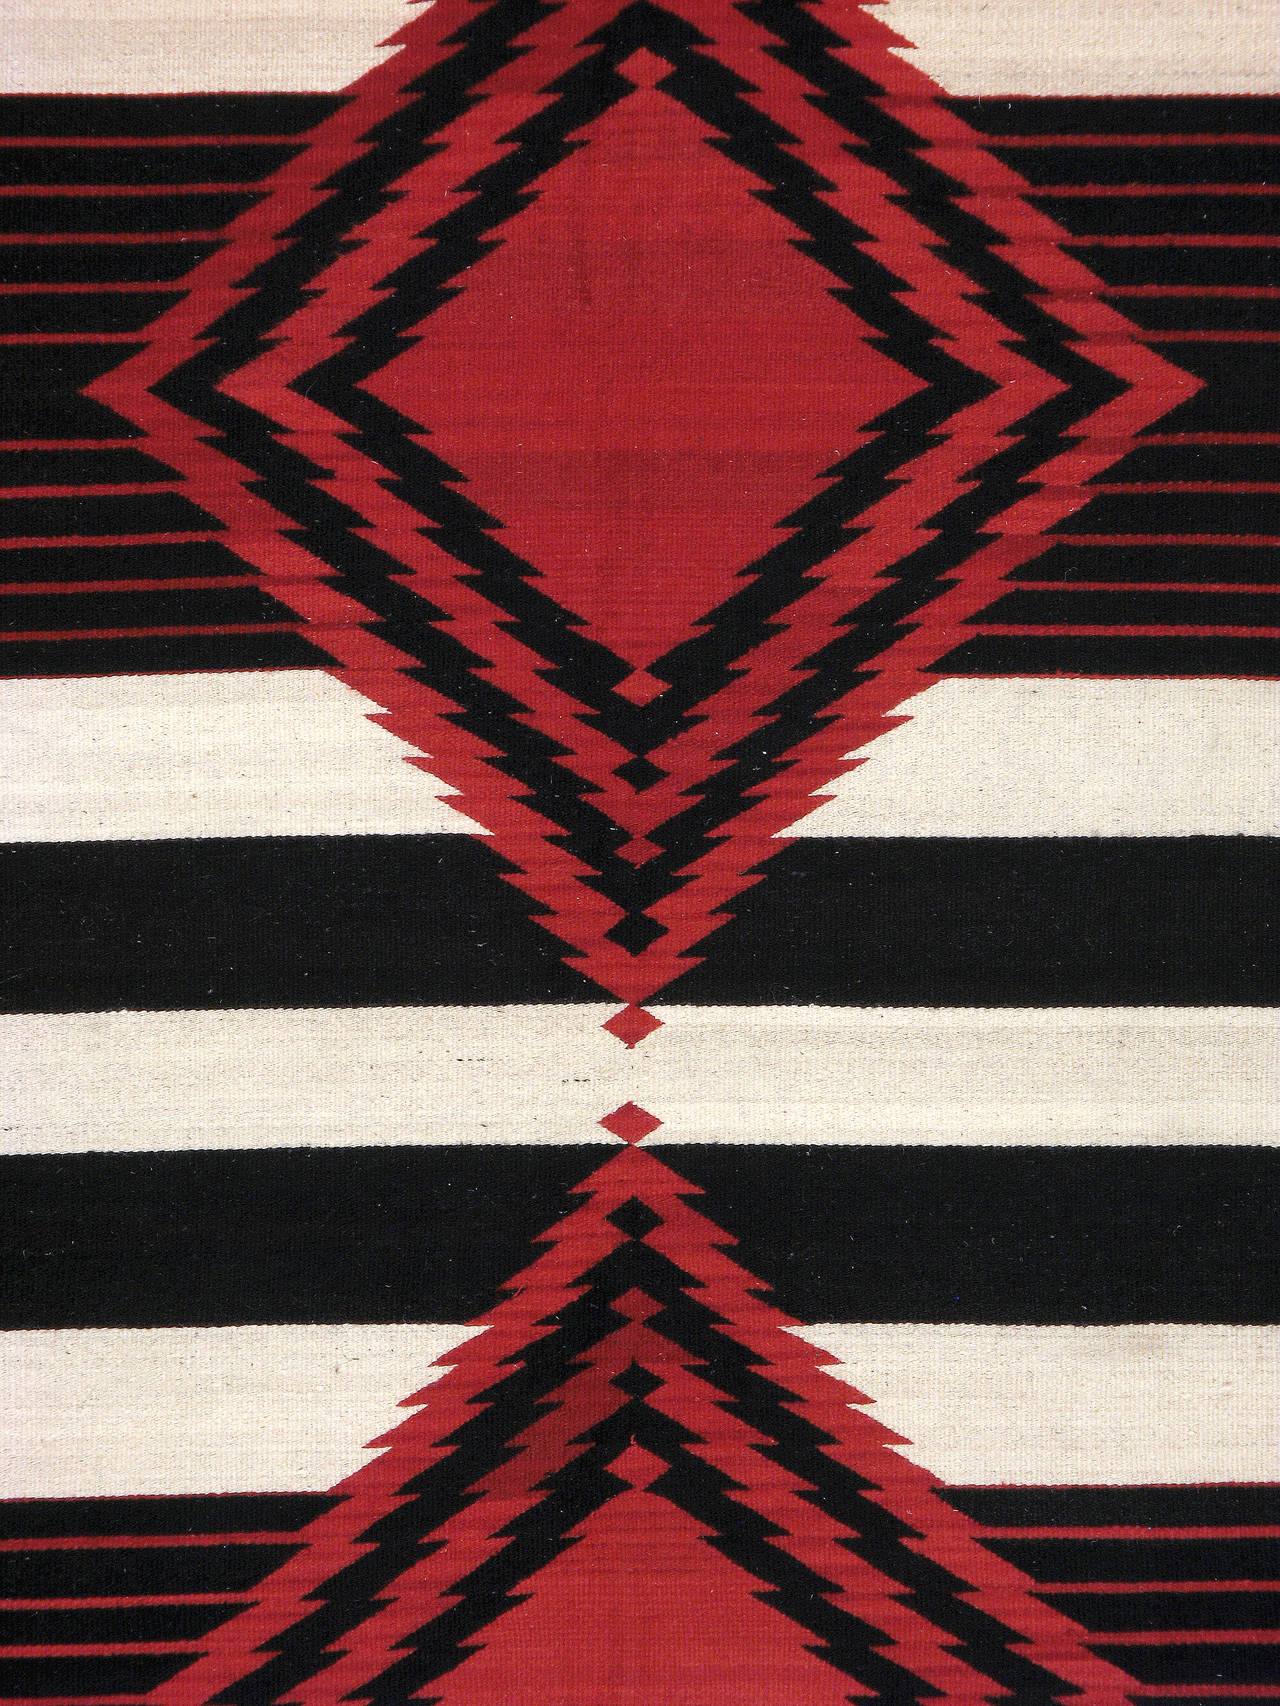 A vintage American Navajo flat-woven carpet from the second quarter of the 20th century.